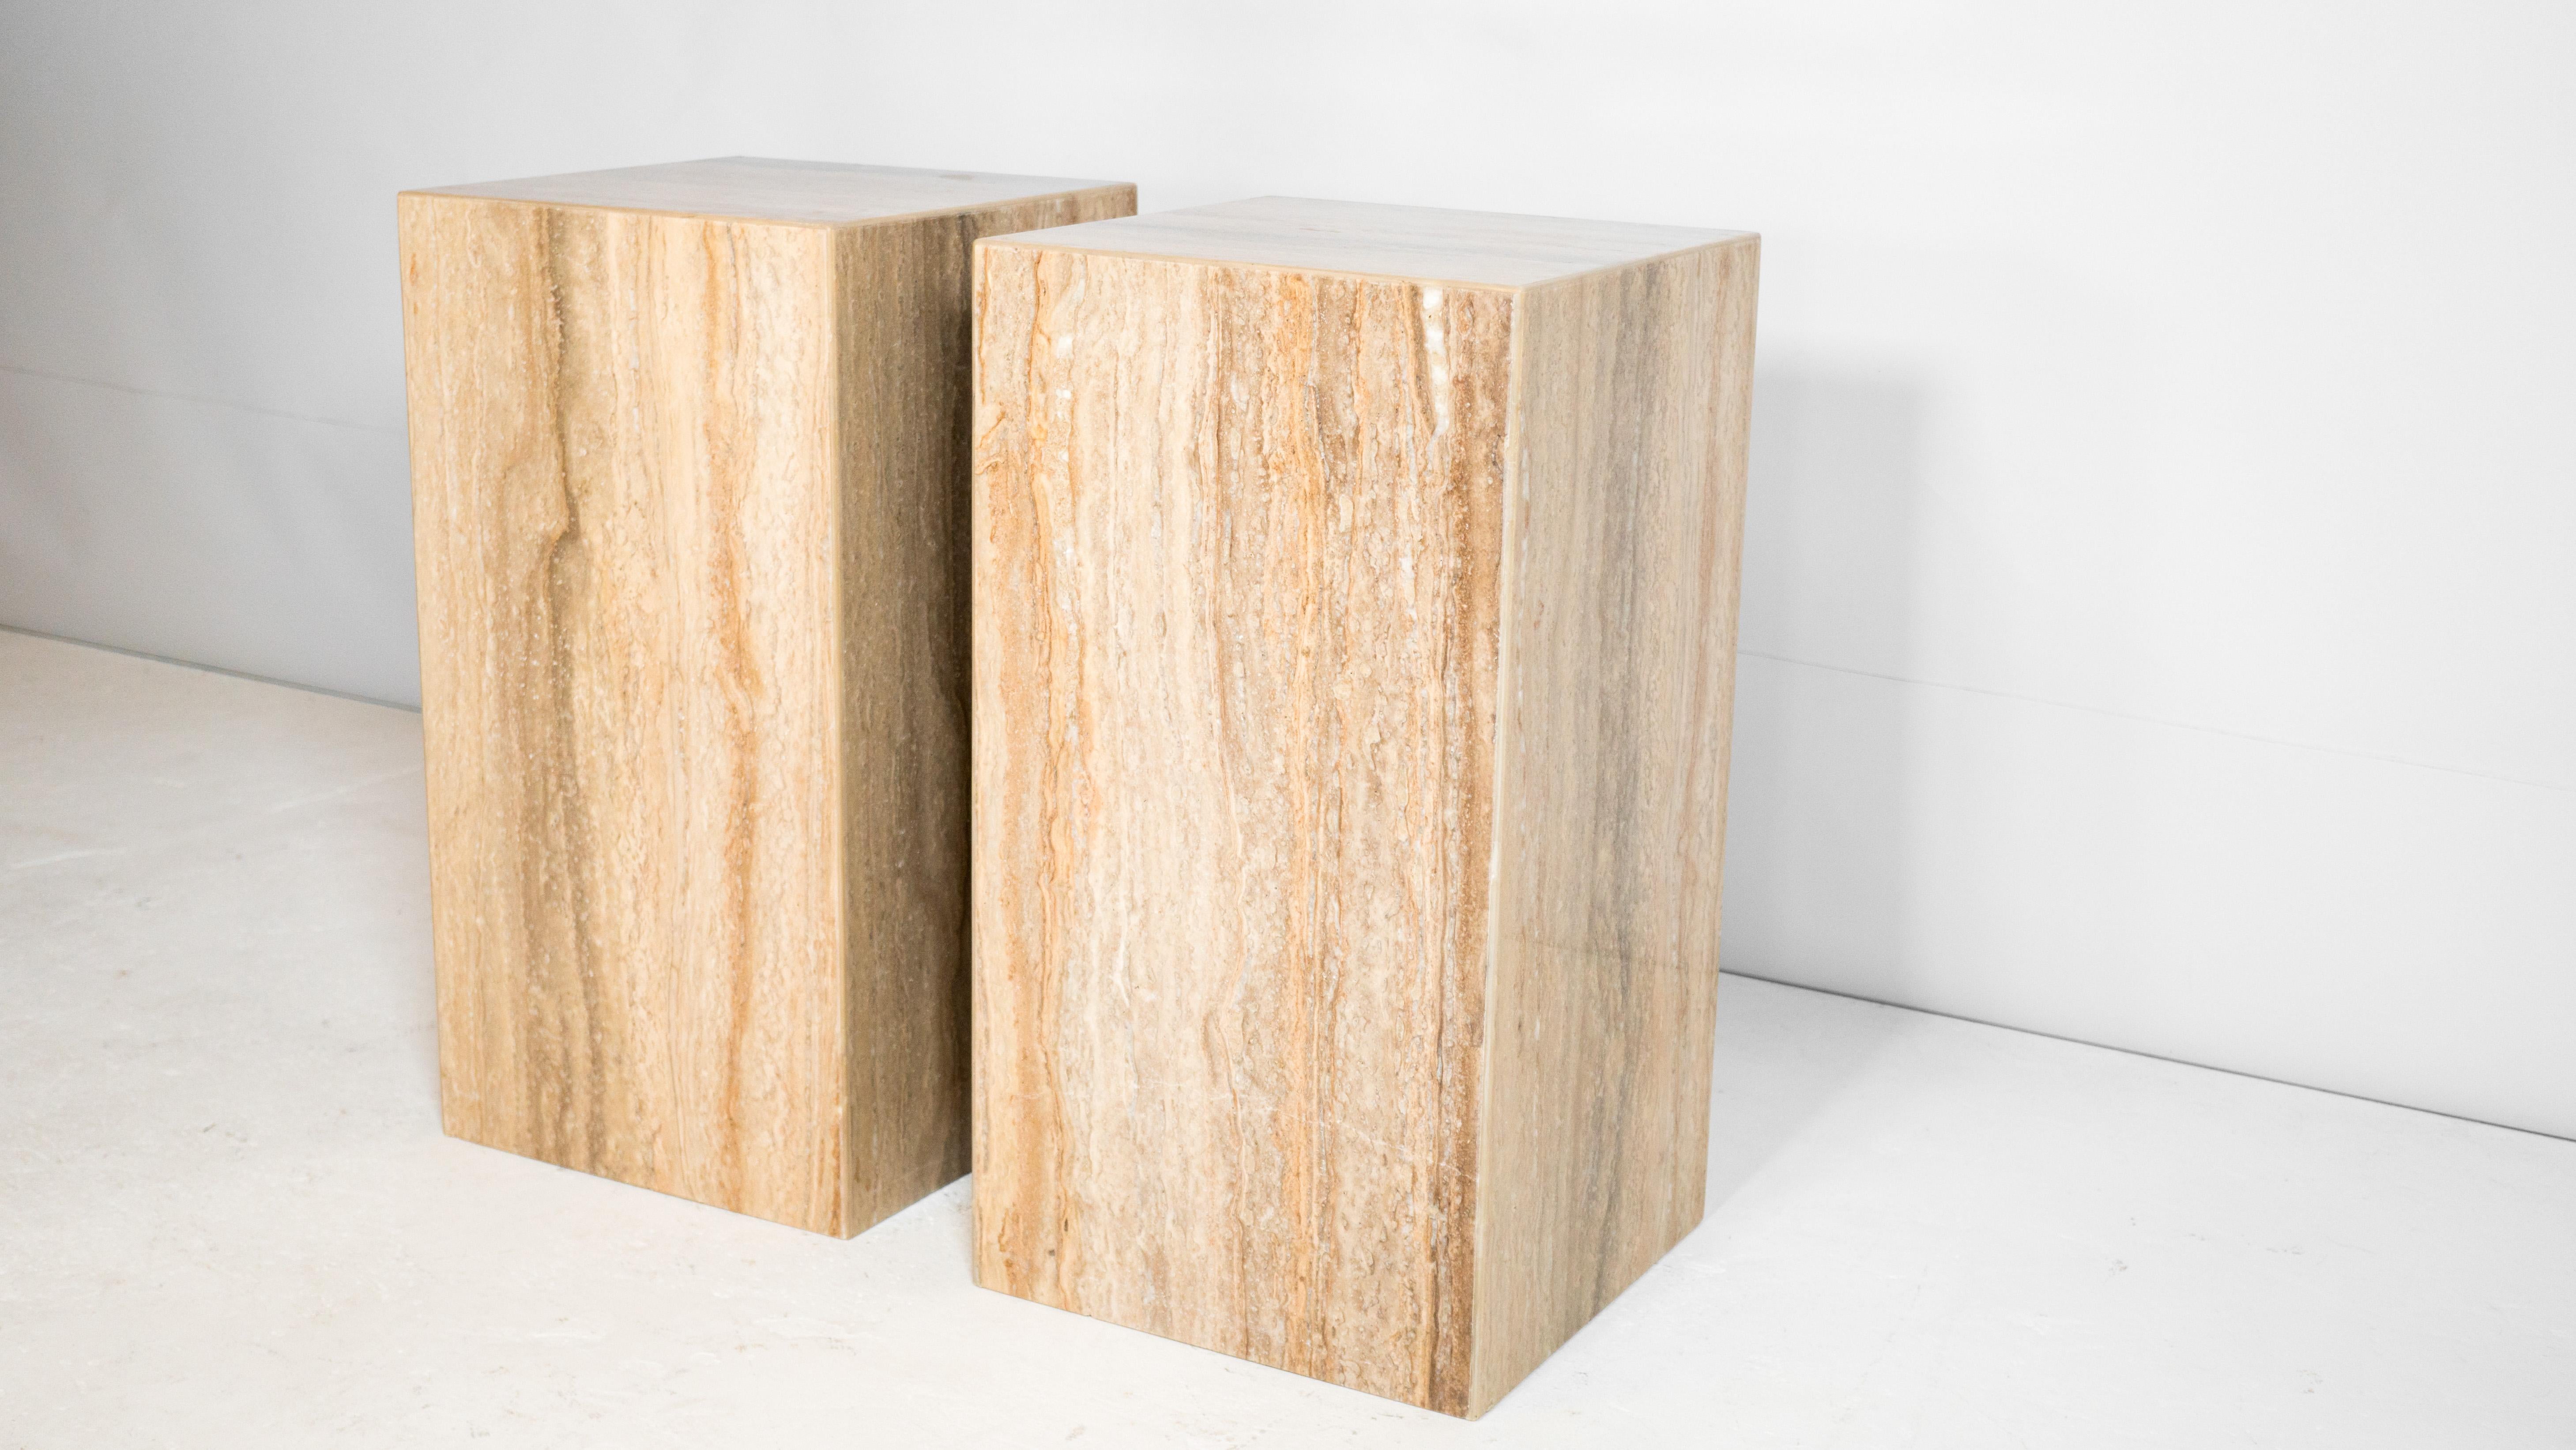 1980s Italian Polished Travertine Tower Cube Side Tables - a Pair For Sale 1